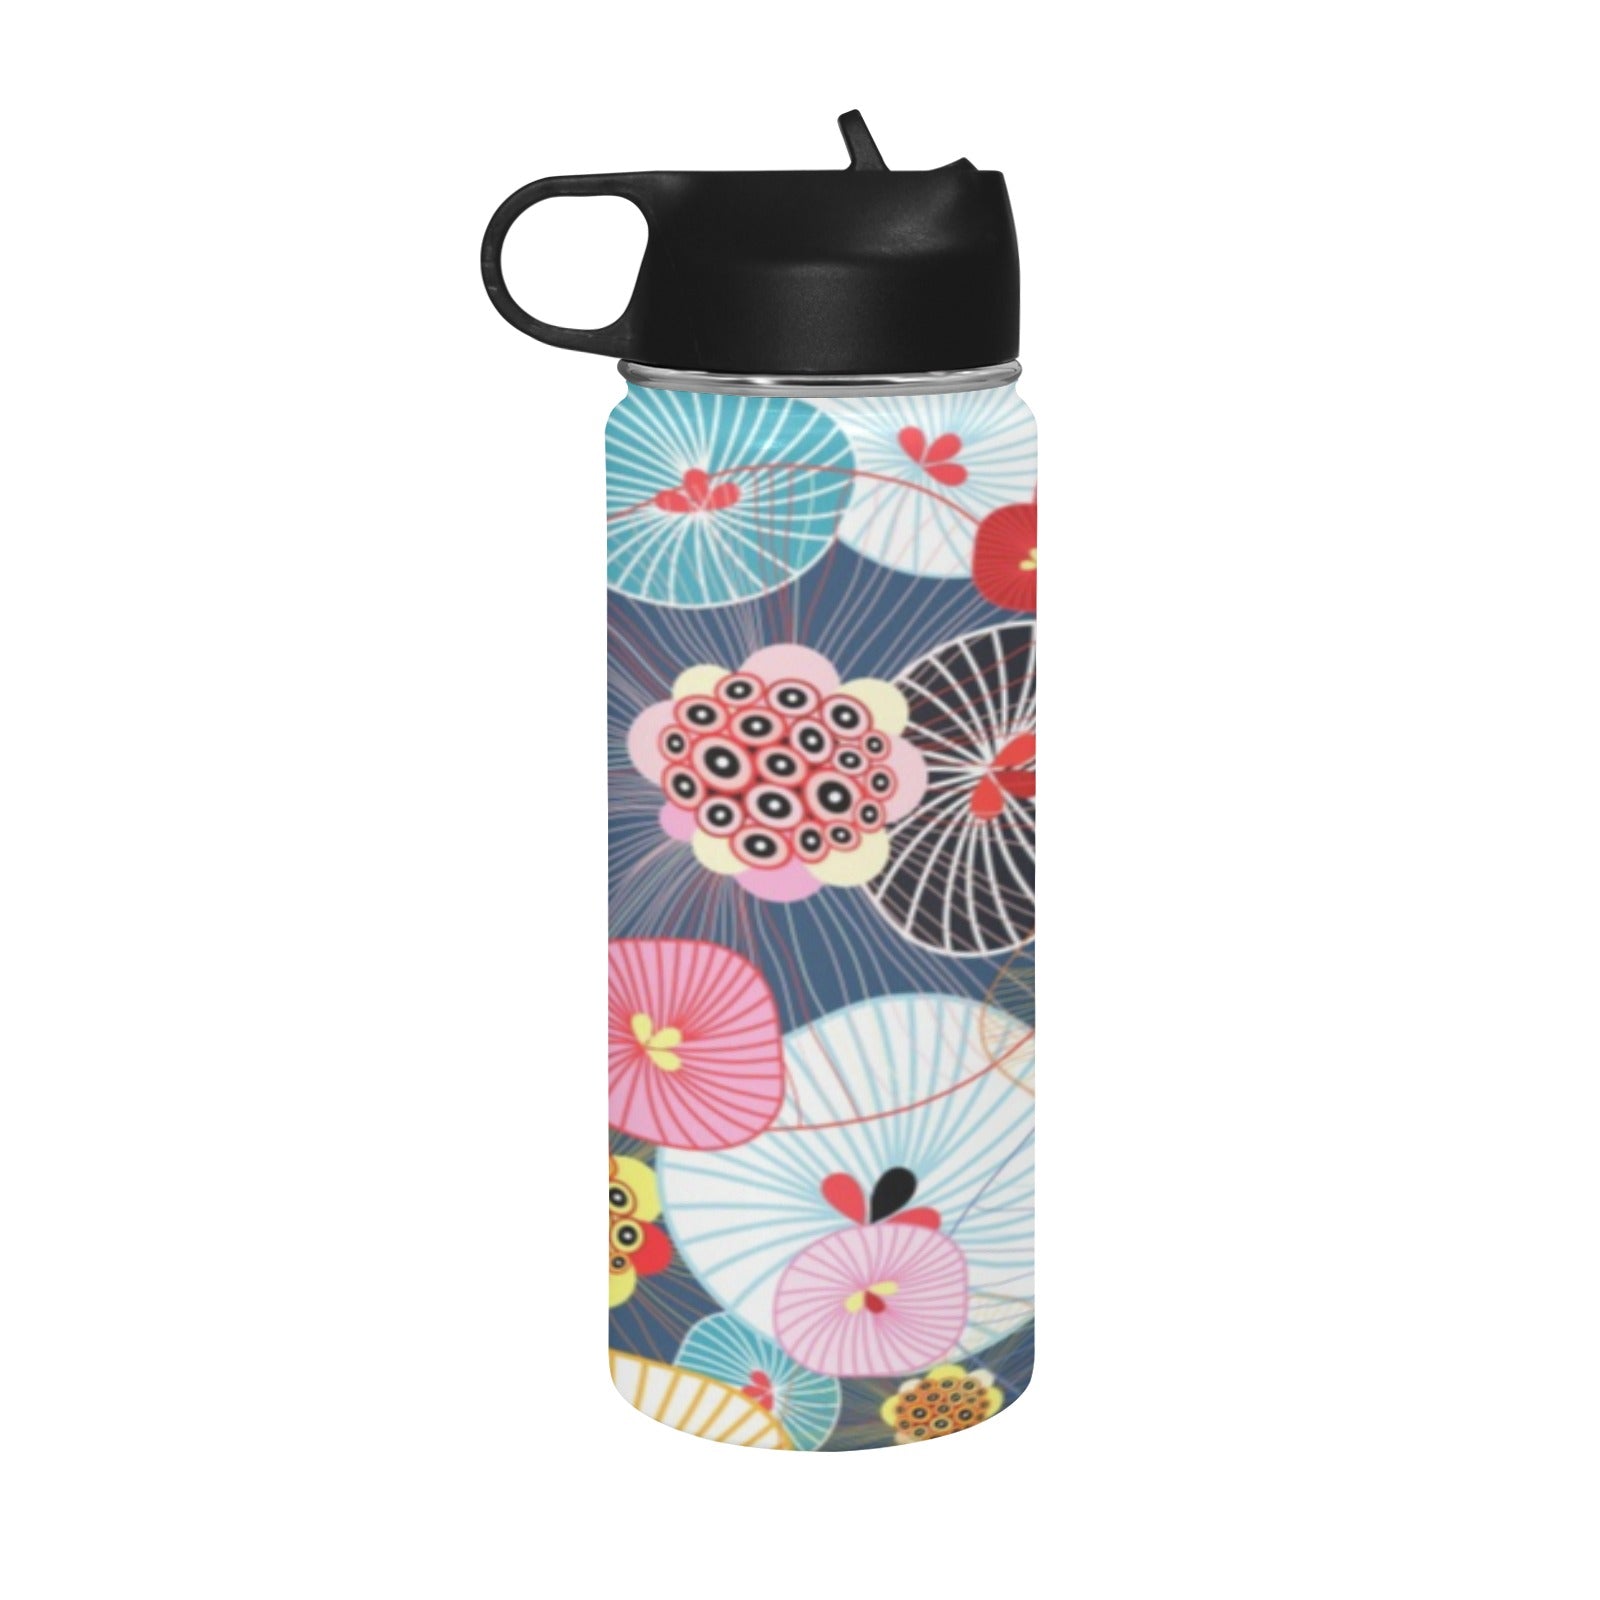 Abstract Floral - Insulated Water Bottle with Straw Lid (18 oz) Insulated Water Bottle with Straw Lid